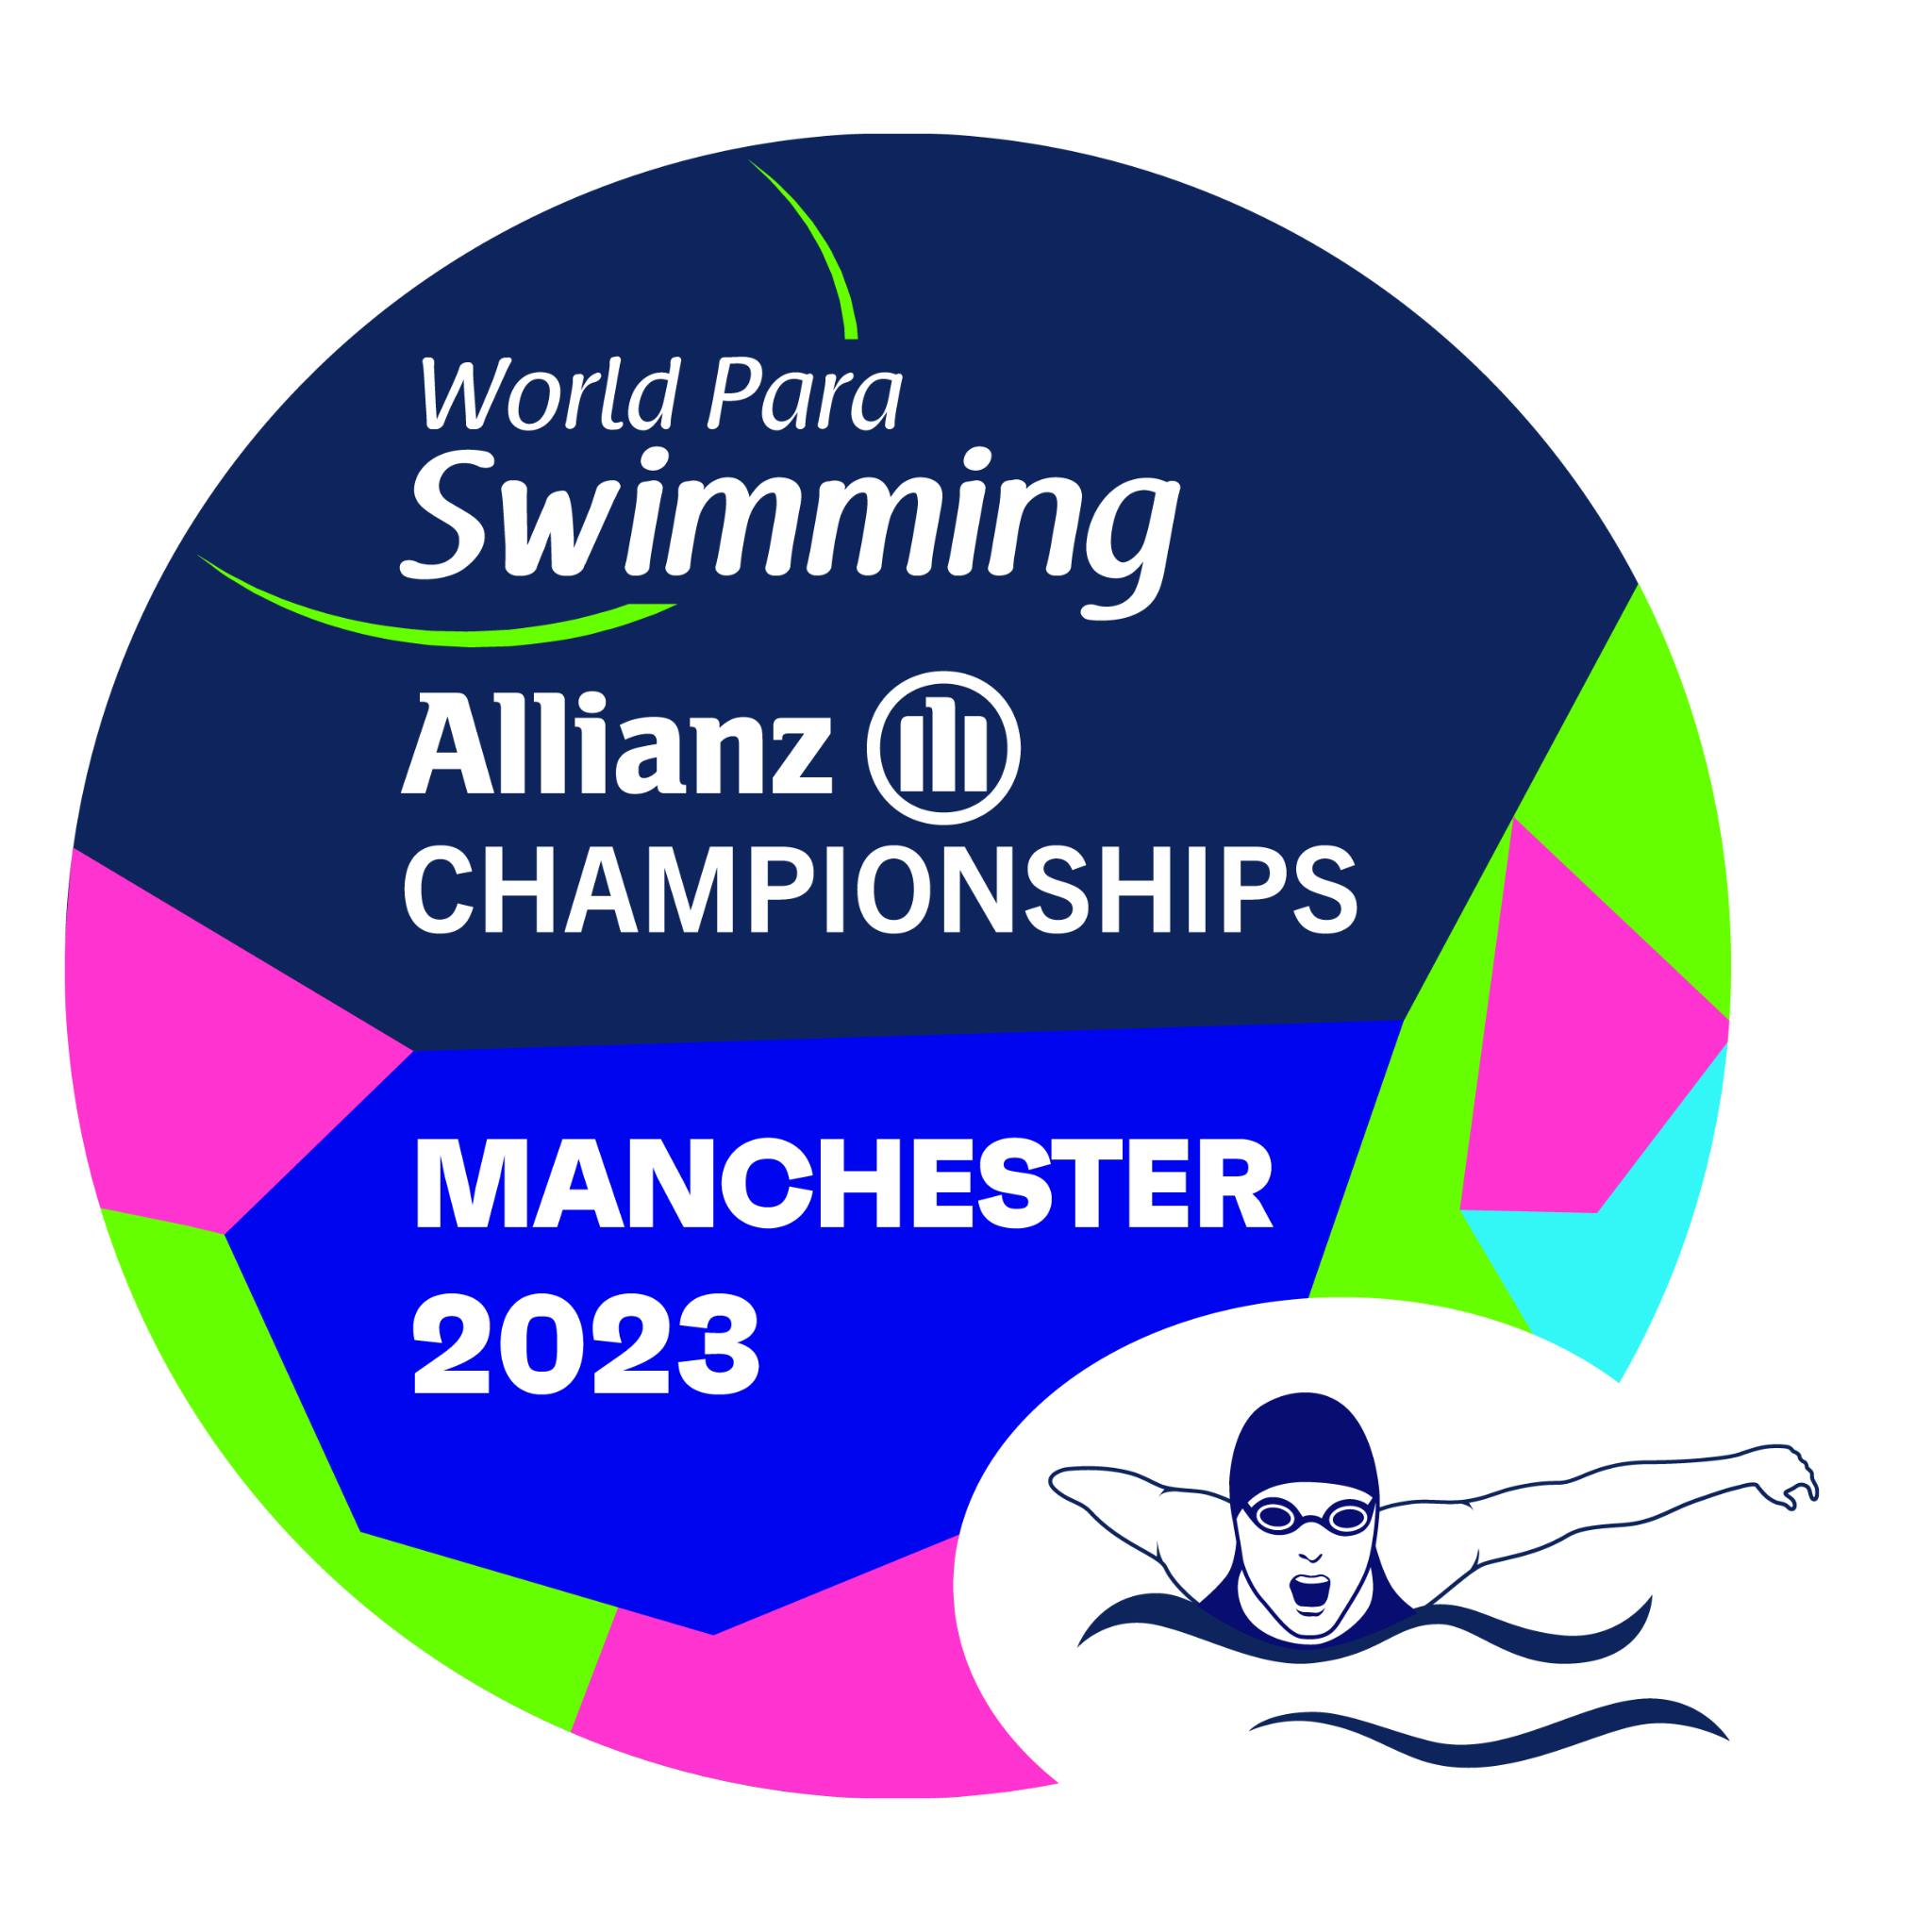 The logo of the Manchester 2023 Allianz Para Swimming World Championships